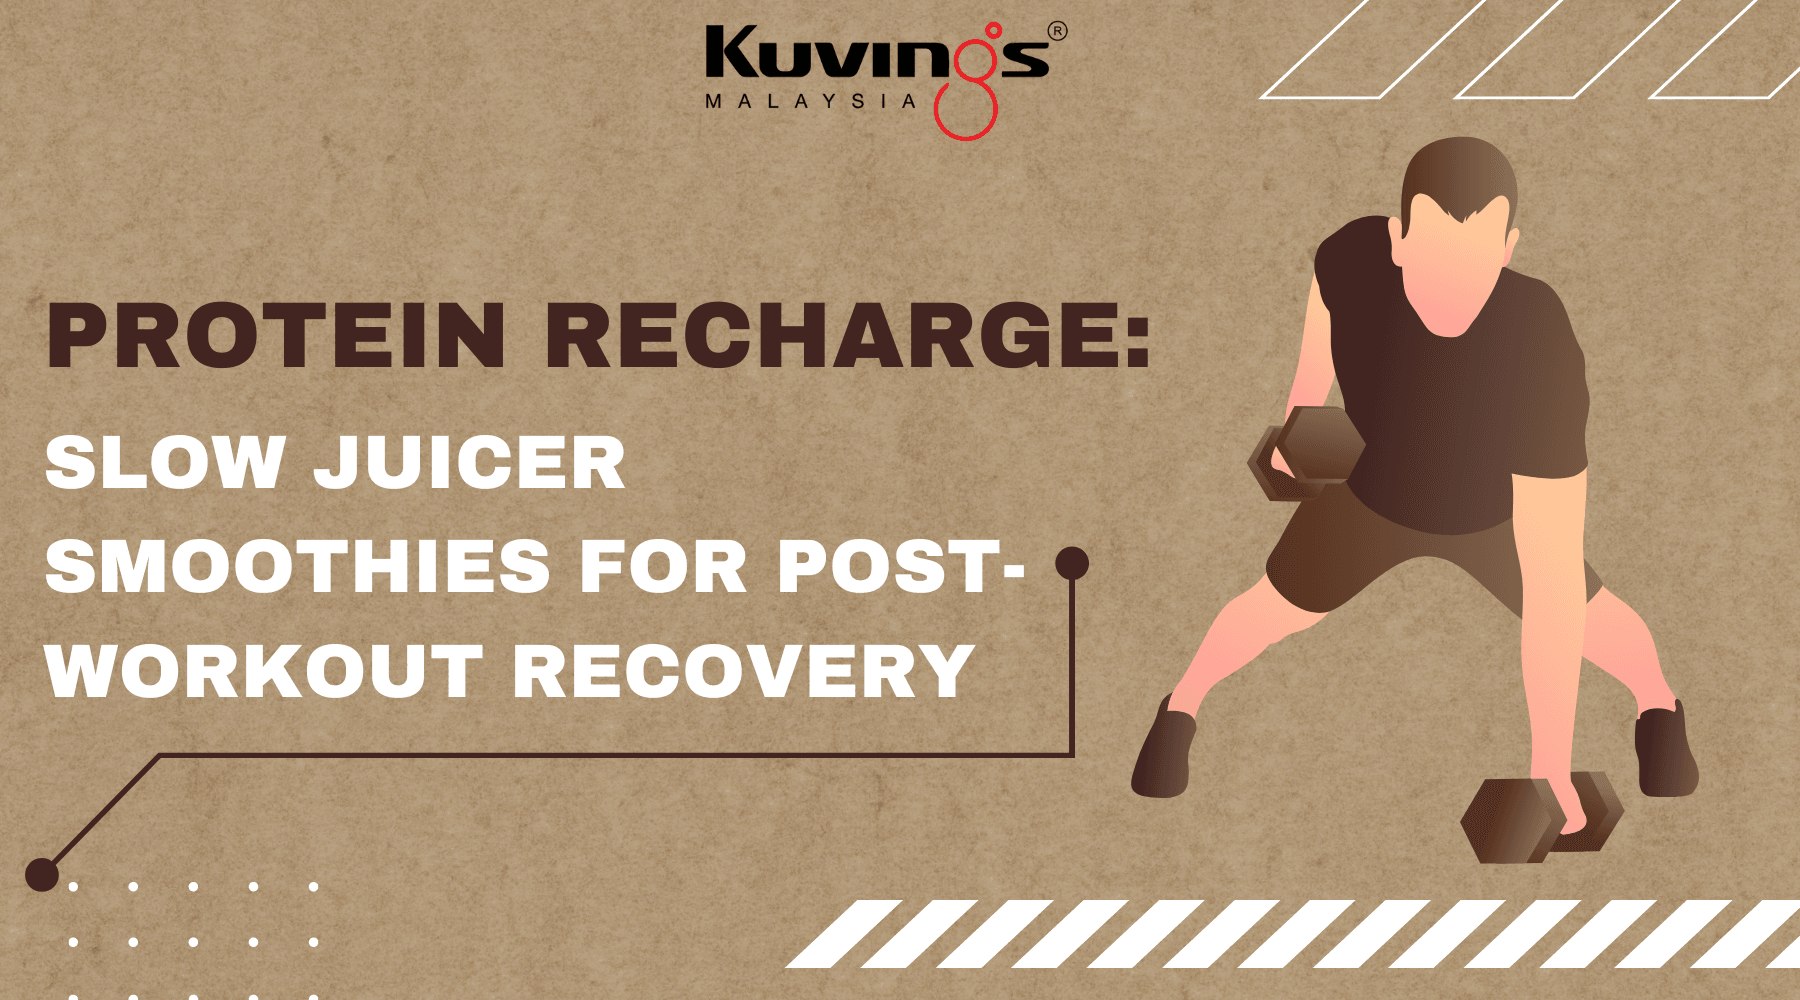 Protein Recharge: Slow Juicer Smoothies for Post-Workout Recovery - Kuvings.my